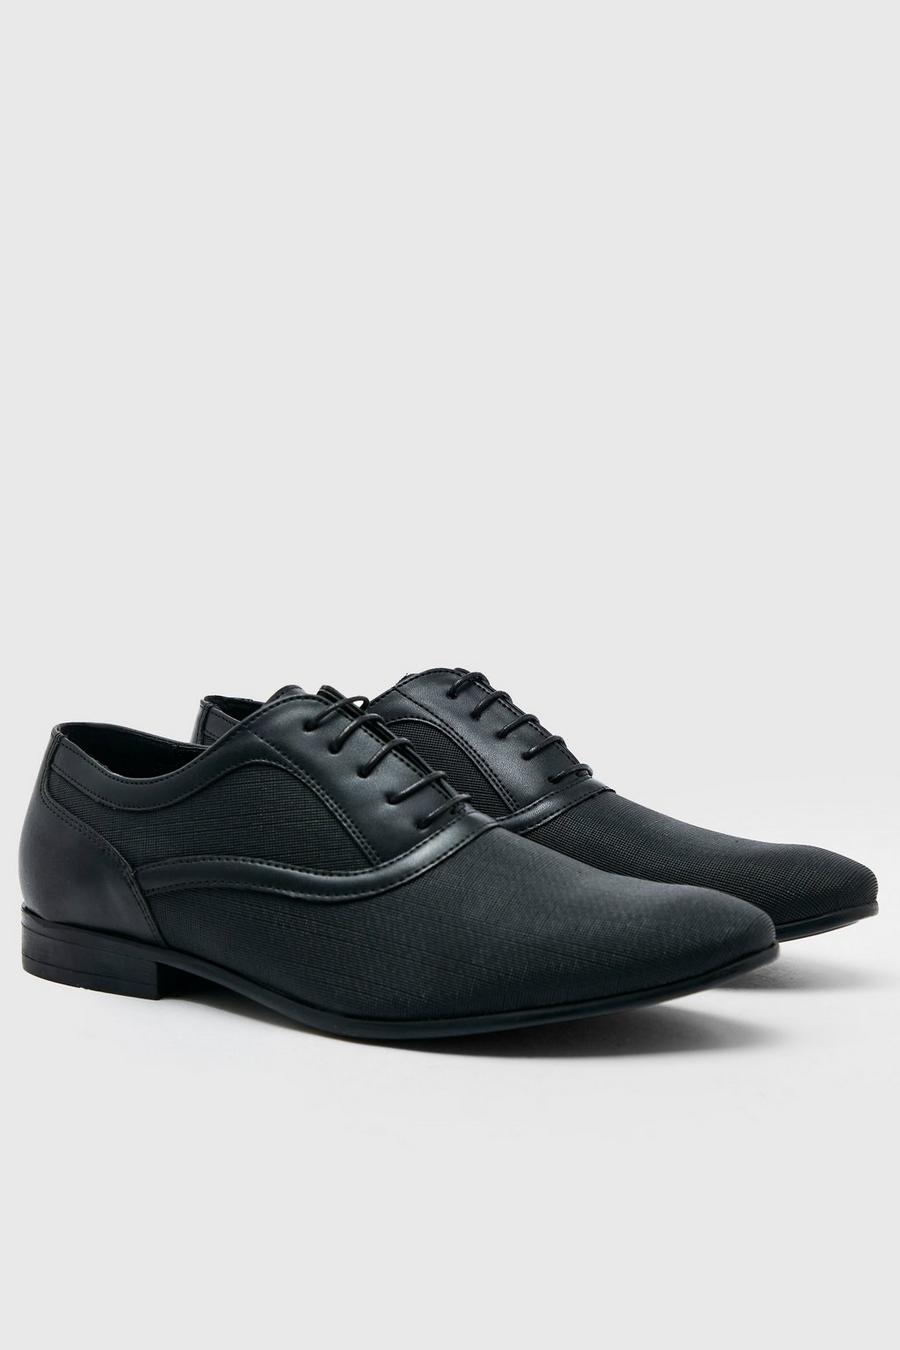 Black nero Embossed Faux Leather Oxford